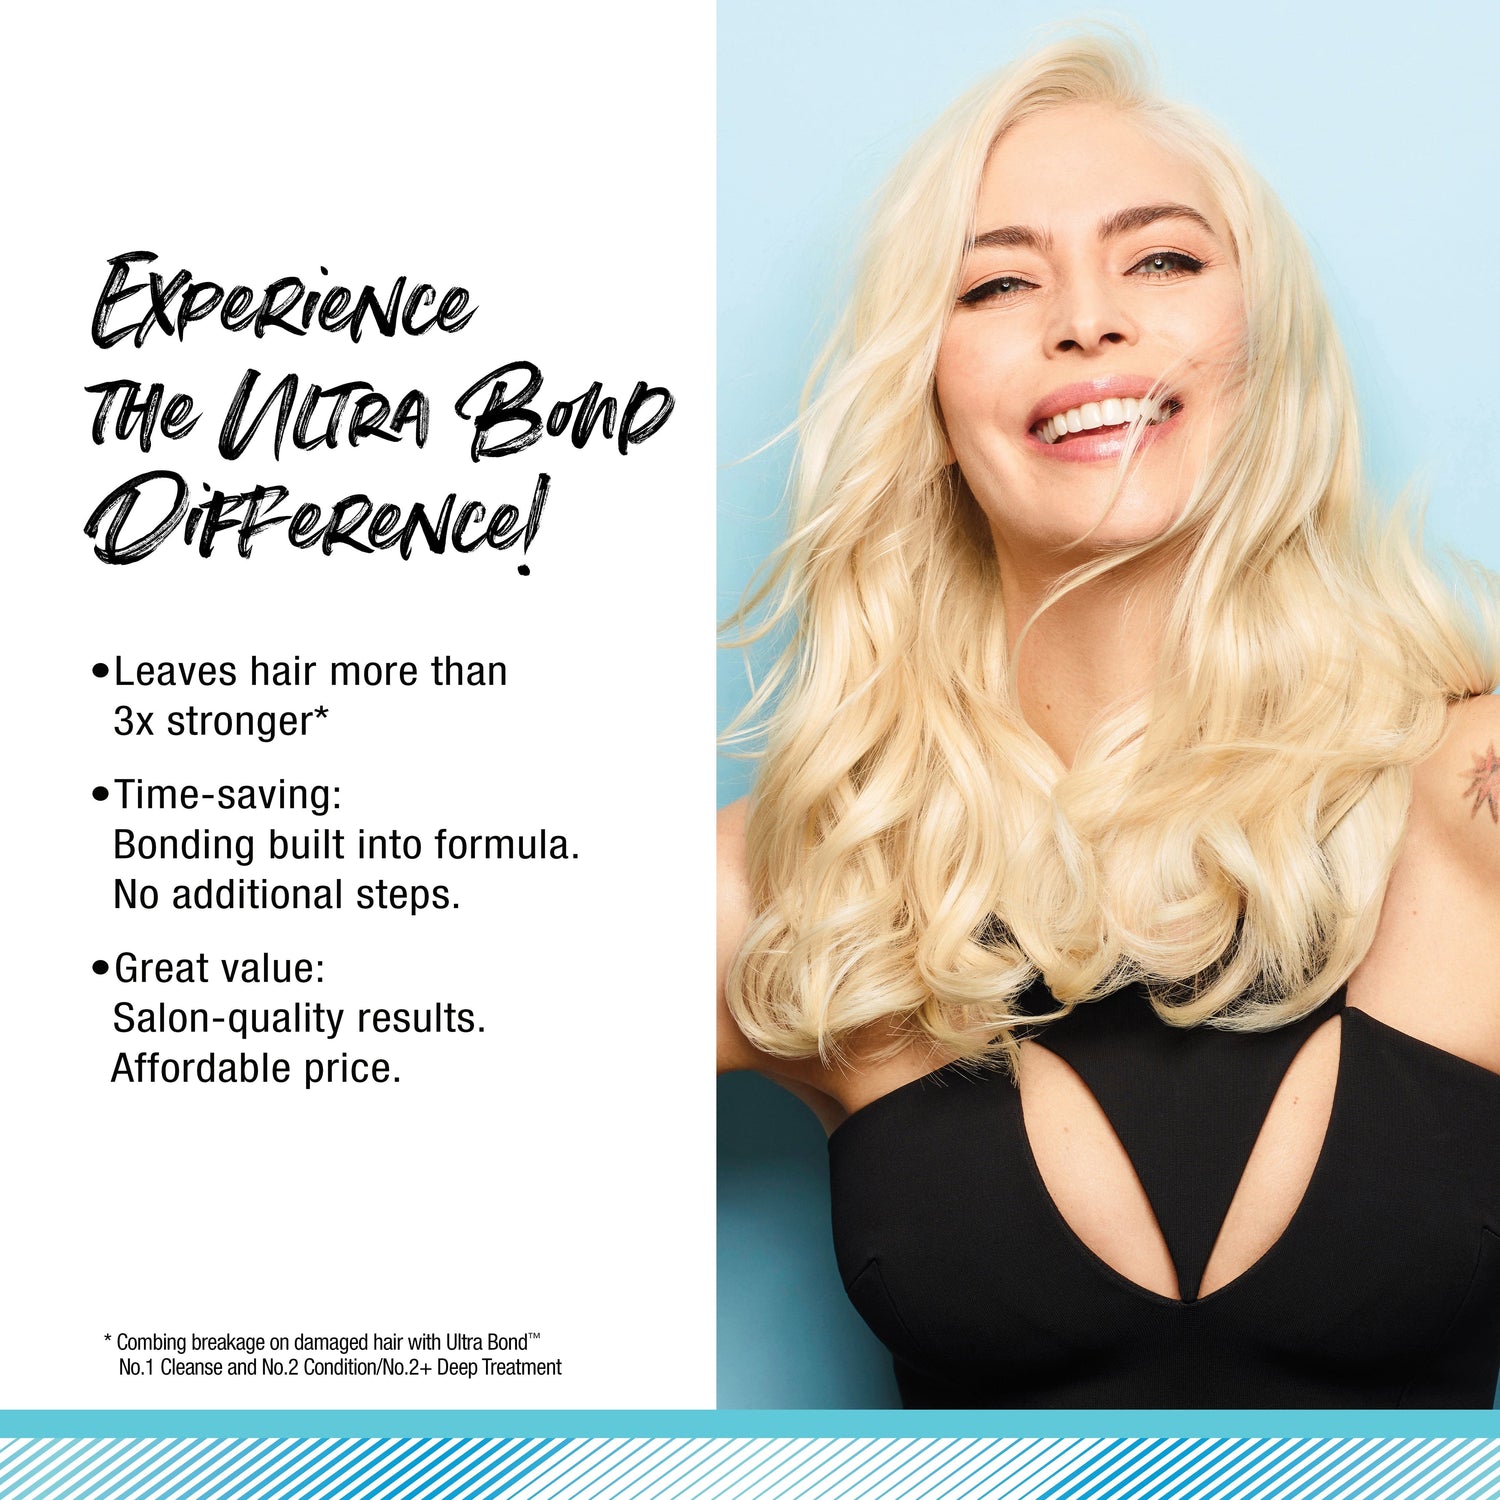 AGEbeautiful® Ultra Bond™ Overnight R&R Leave-in Treatment+ leaves hair stronger, saves time and is a great value.